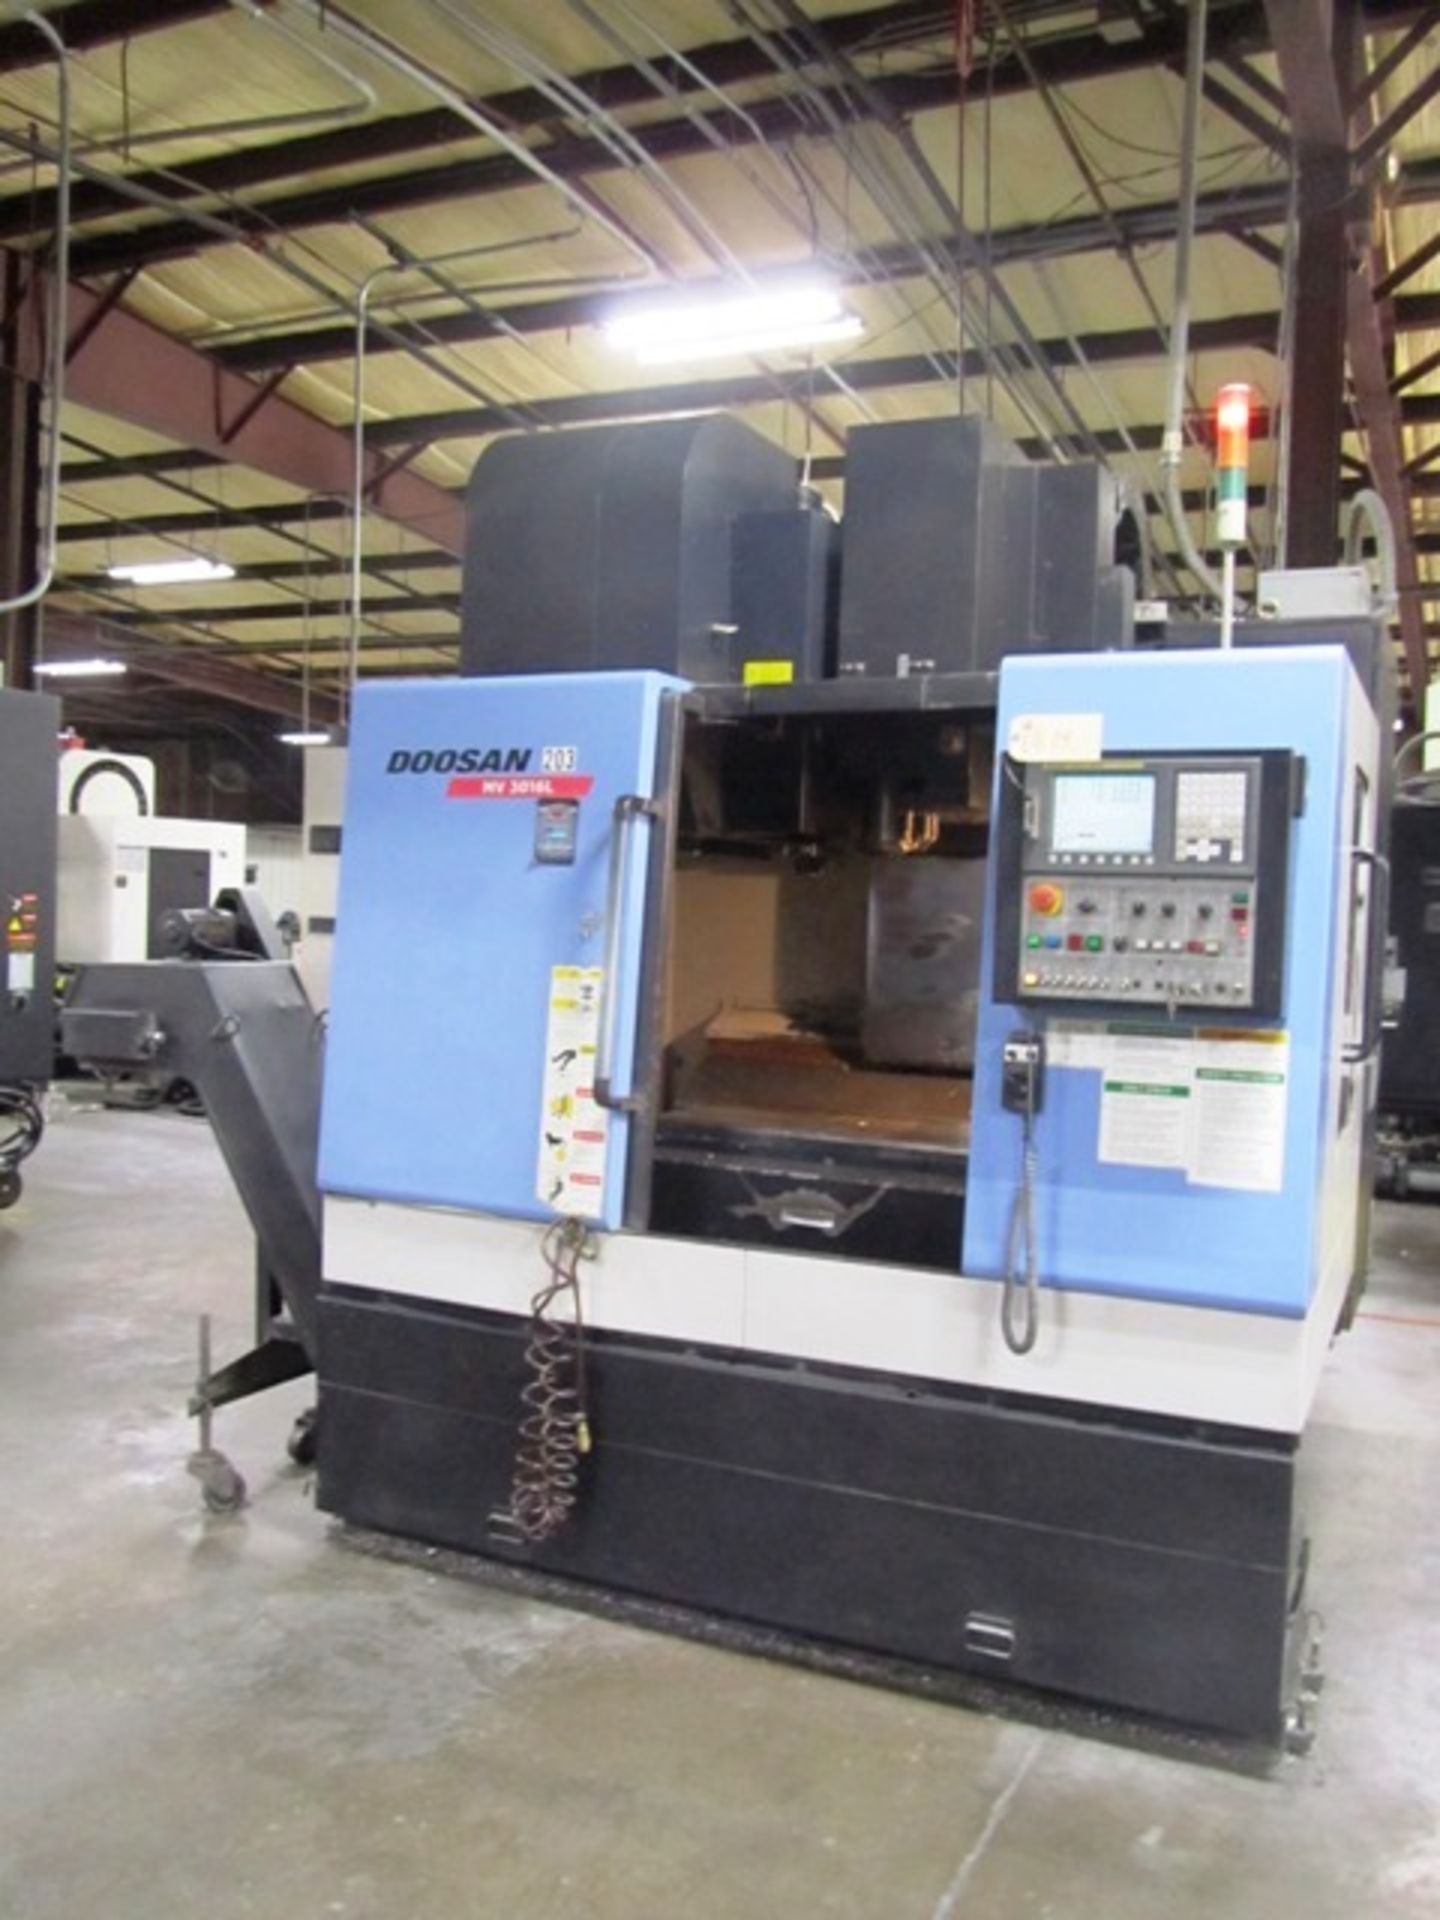 Doosan MV 3016L CNC Vertical Machining Center with 37'' x 17'' Worktable, #40 Taper Spindle Speeds - Image 3 of 5